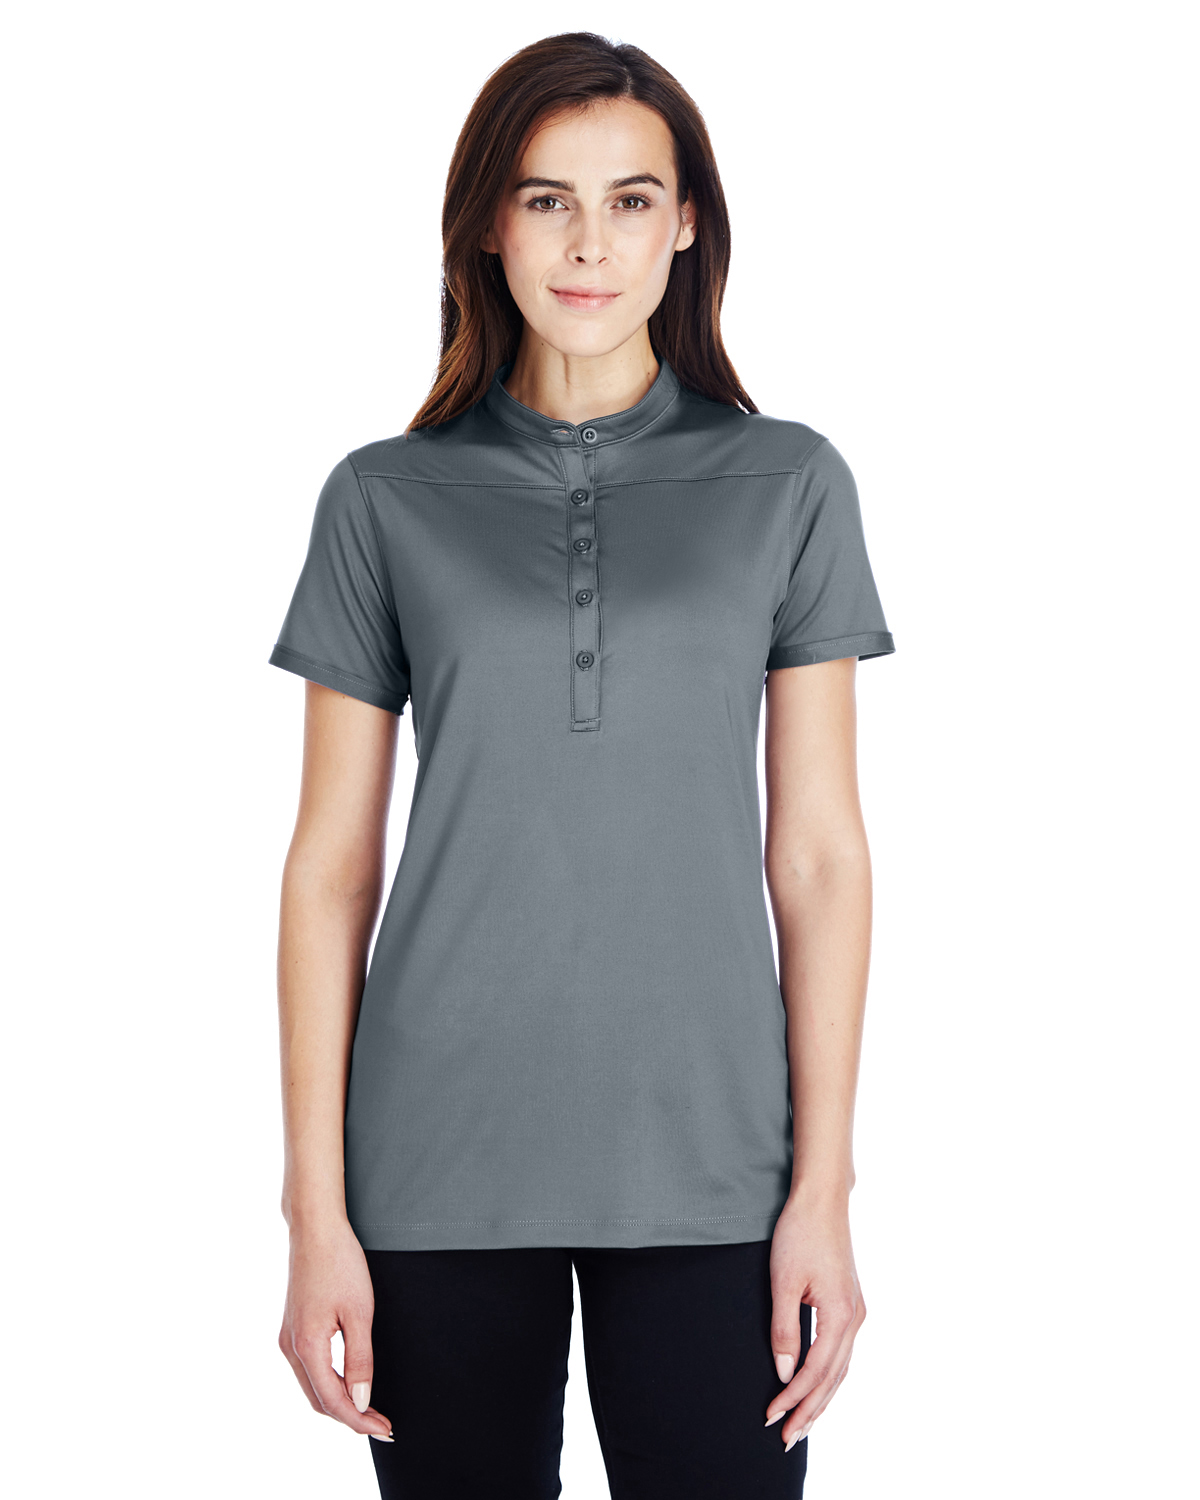 Under Armour  Ladies' Corporate Performance Polo 2.0